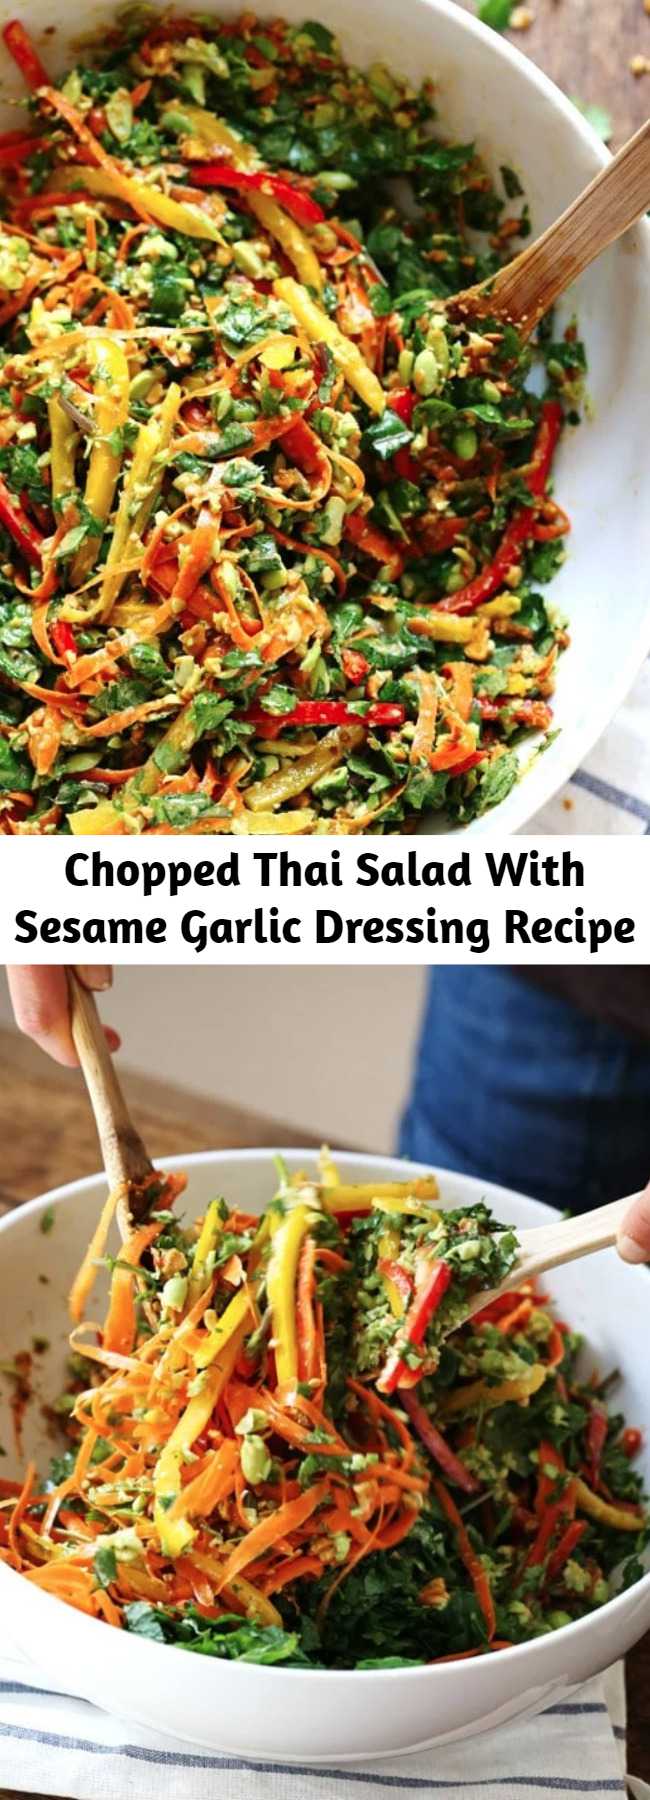 Chopped Thai Salad With Sesame Garlic Dressing Recipe - This Chopped Thai Salad with Sesame Garlic Dressing is THE BEST! A rainbow of power veggies with a yummy homemade dressing. #vegan #vegetarian #healthy #sugarfree #cleaneating